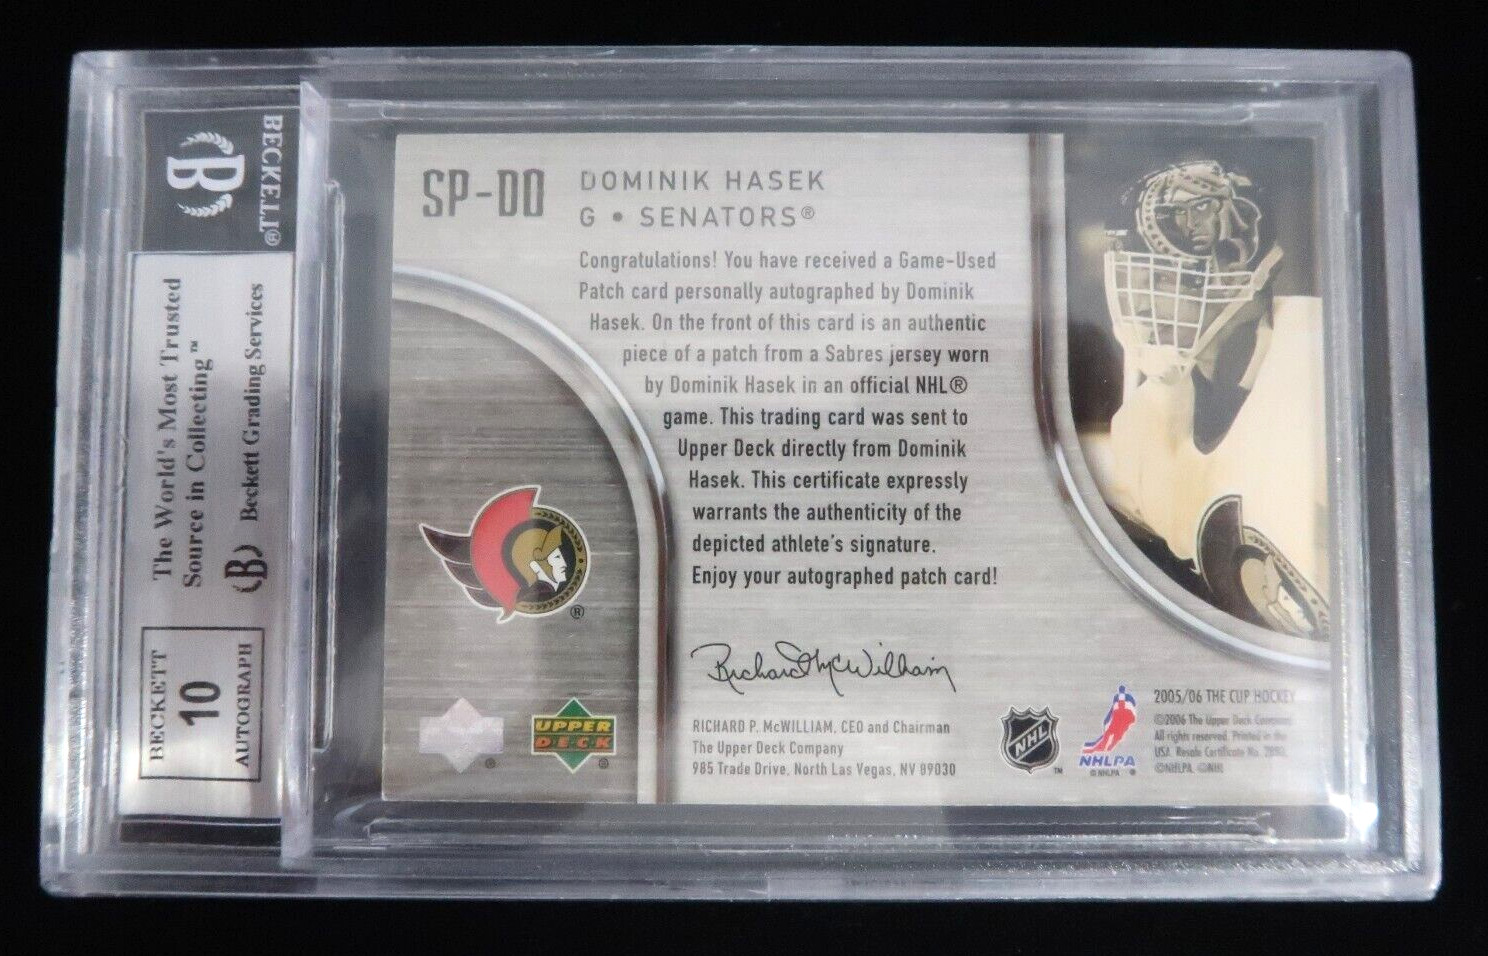 2005-06 Upper Deck The Cup Dominik Hasek Signature Patch Auto /75 BGS 8.5 / 10